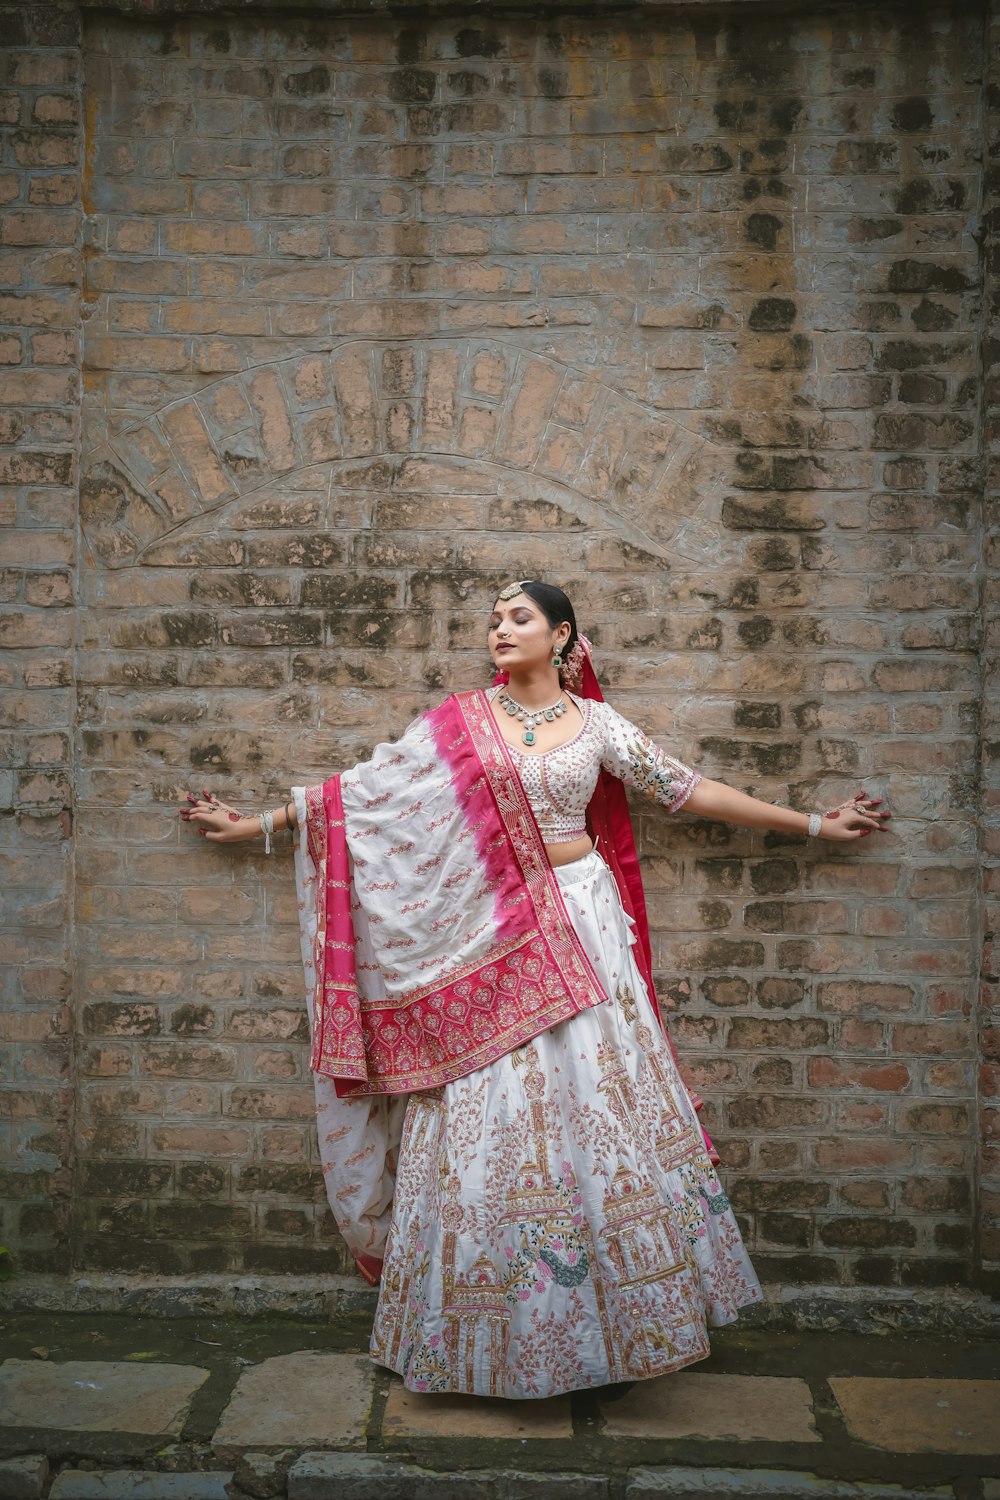 a woman in a white and pink lehenga standing in front of a brick